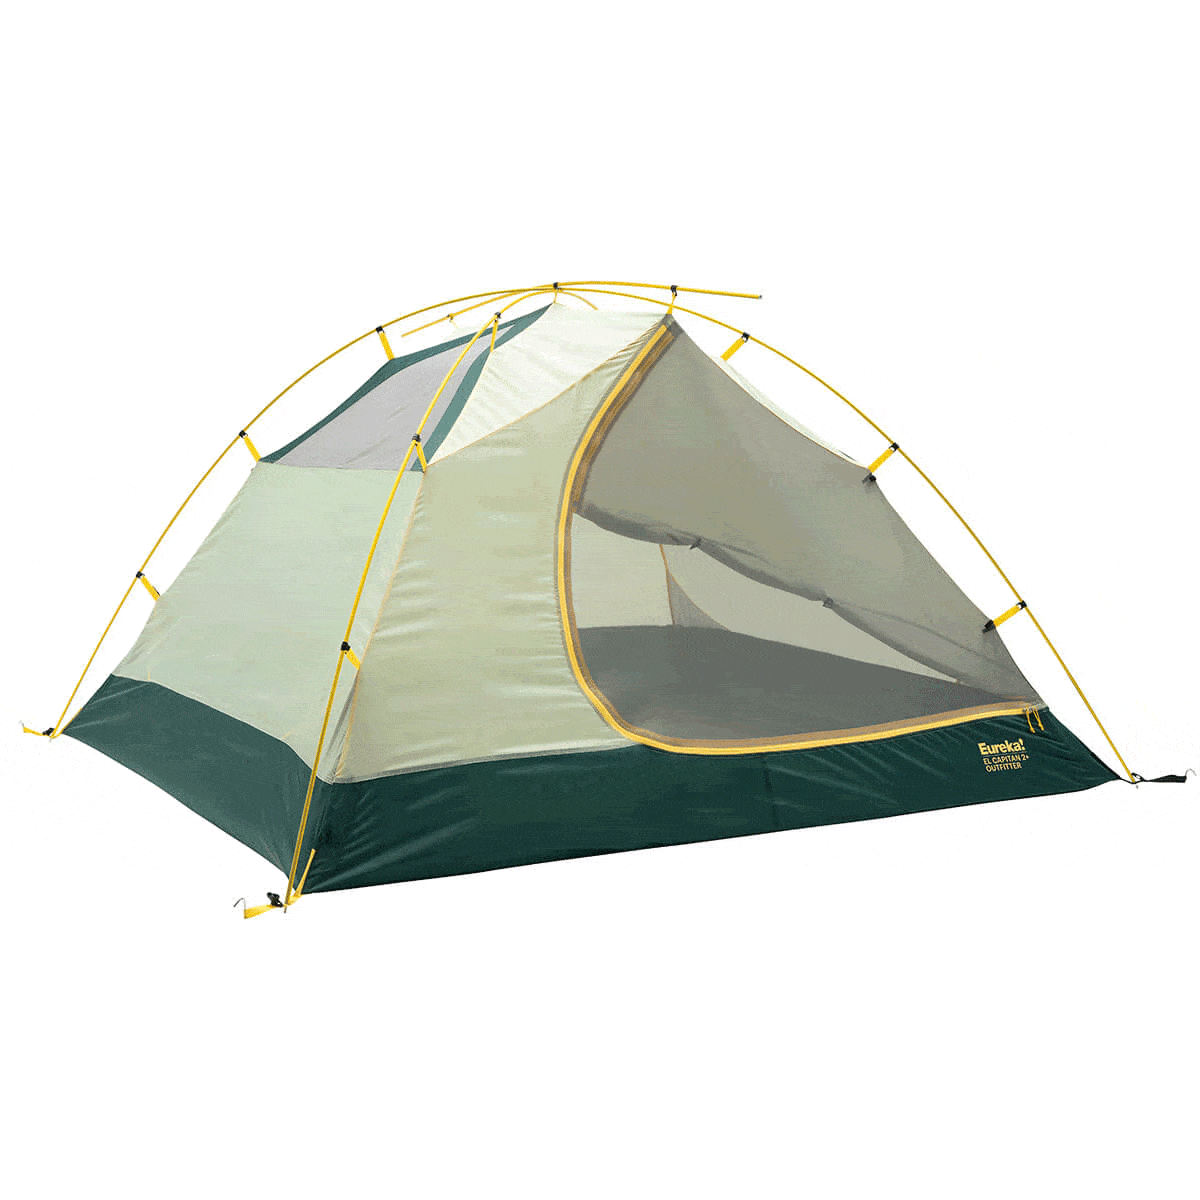 El Capitan 2+ Outfitter 2 Person Tent